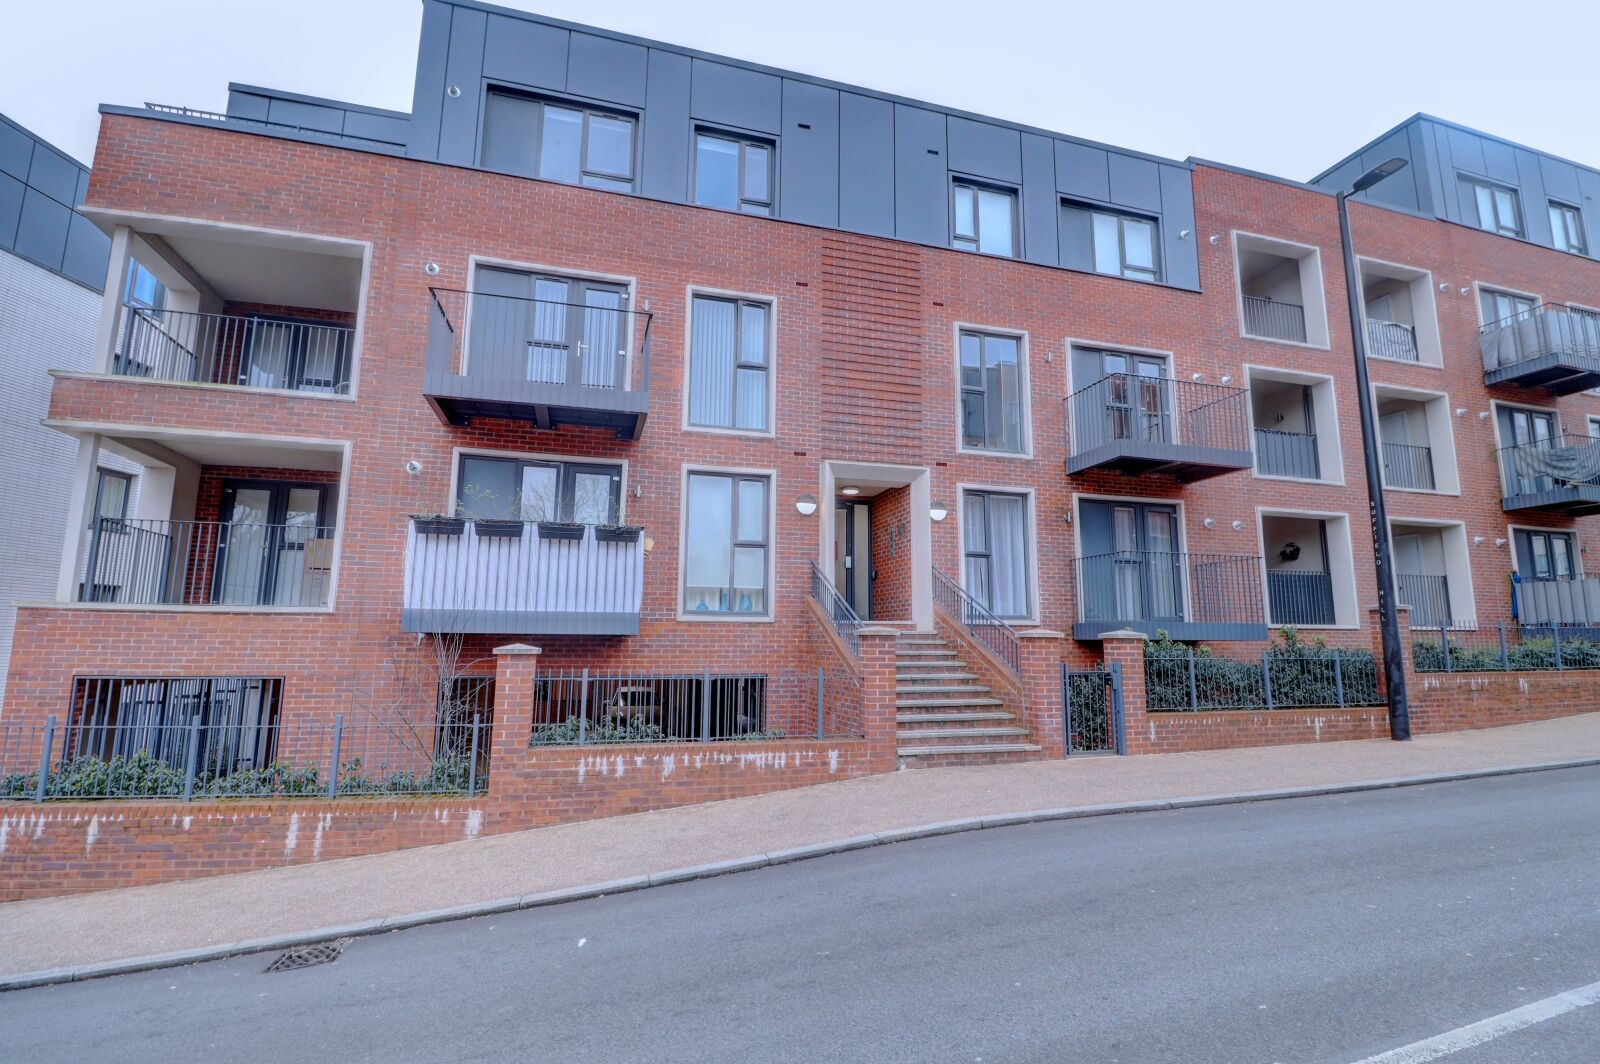 2 bedroom  flat to rent, Available now Suffield Hill, High Wycombe, HP11, main image